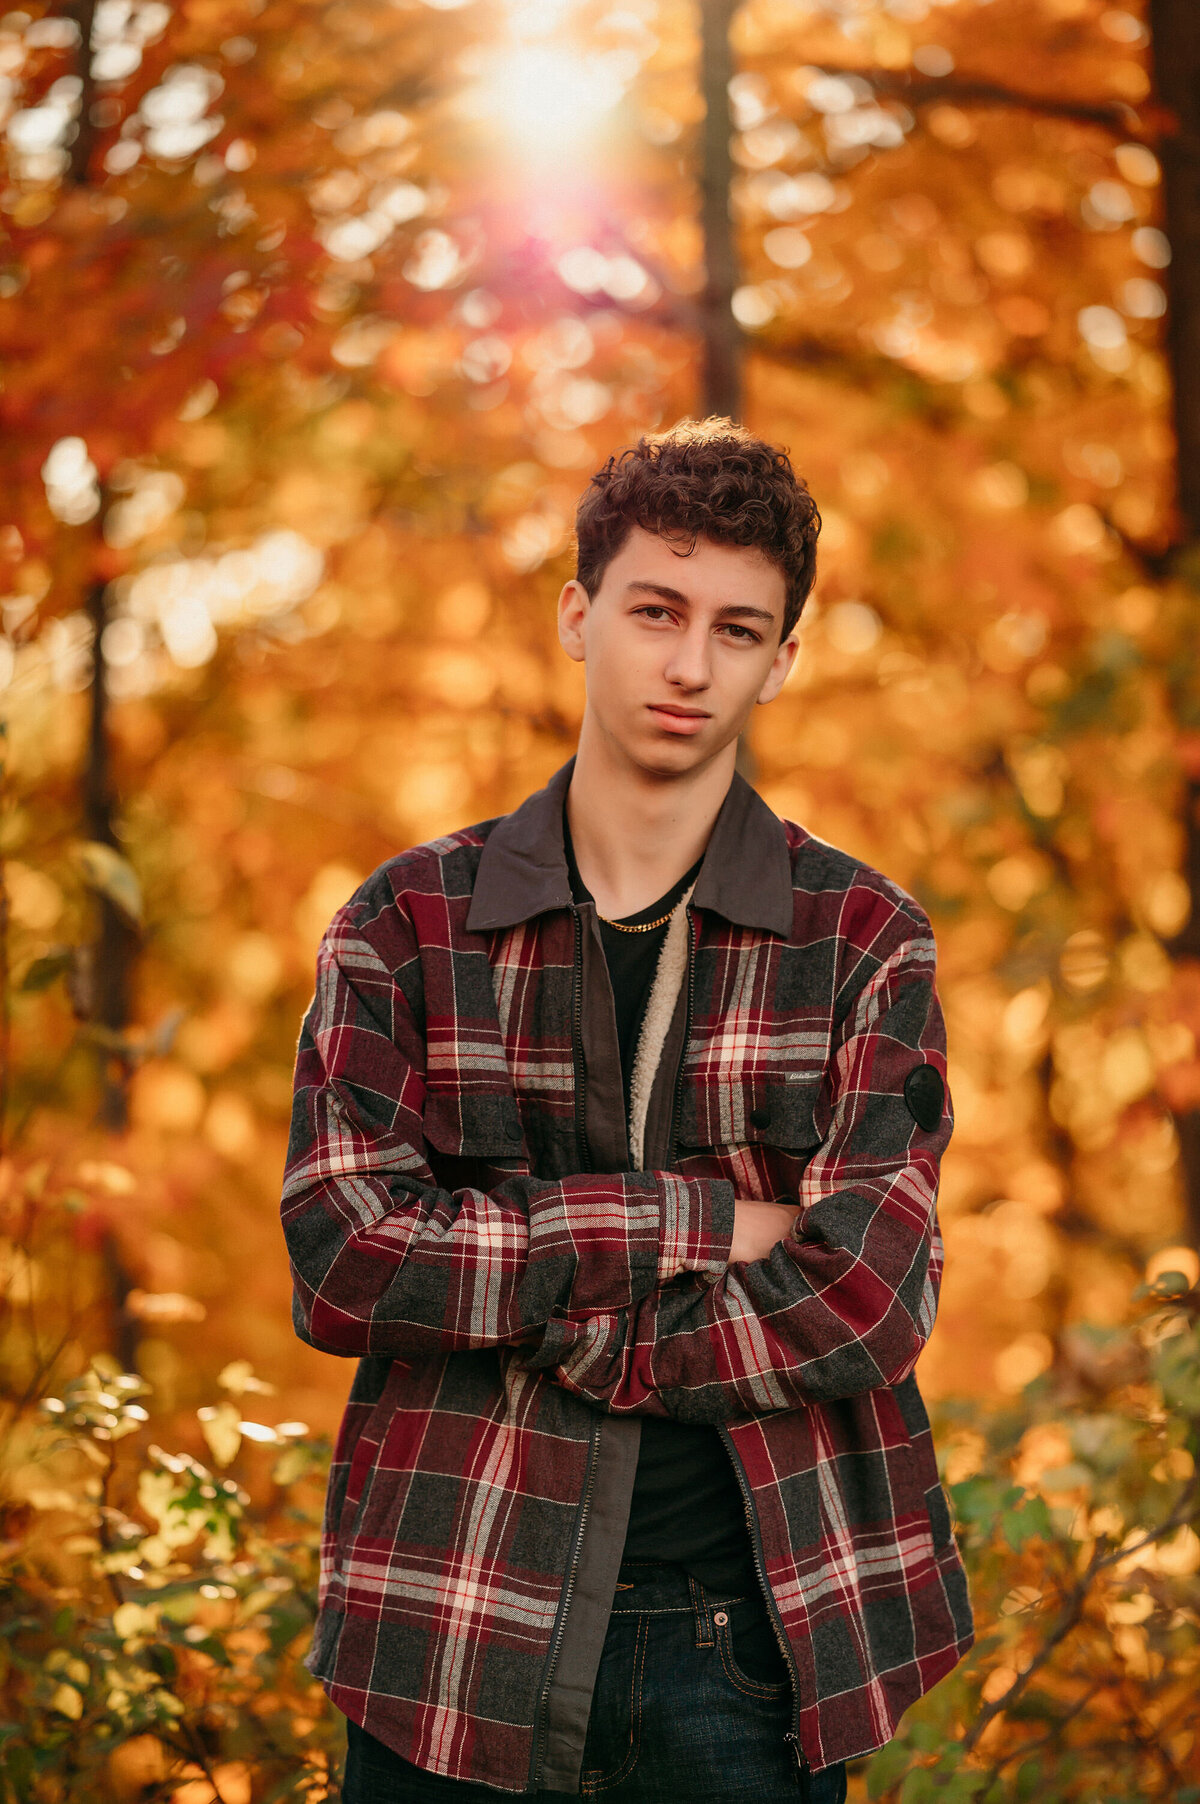 A boy from Oconomowoc High School wears a red flannel jacket surrounded by autumn colors at Delafield's Lapham Peak.